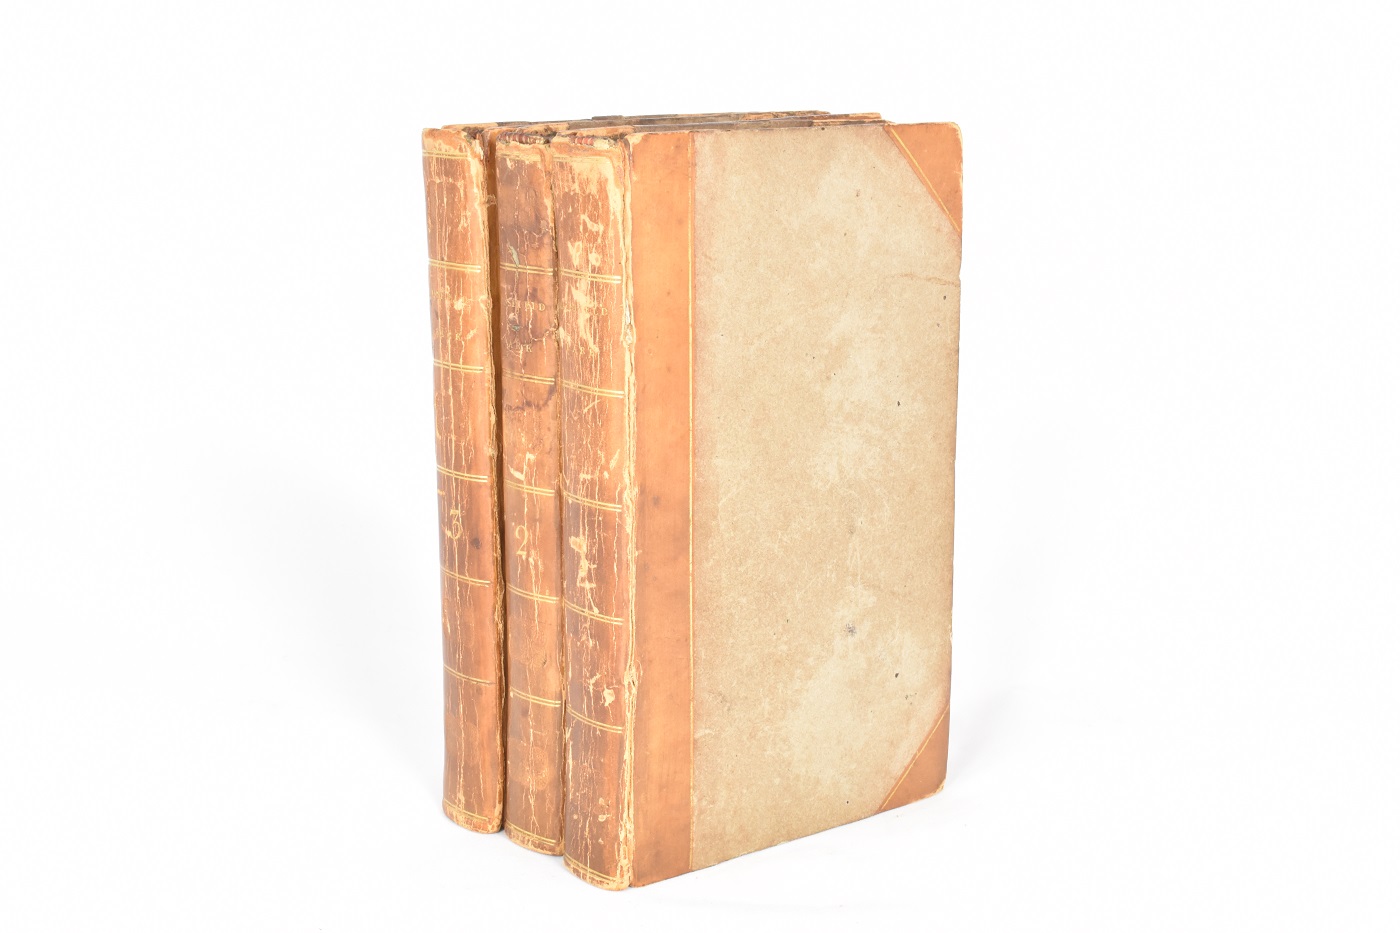 First edition of Mansfield Park published in May 1814. A three volume set, seen at a slant.